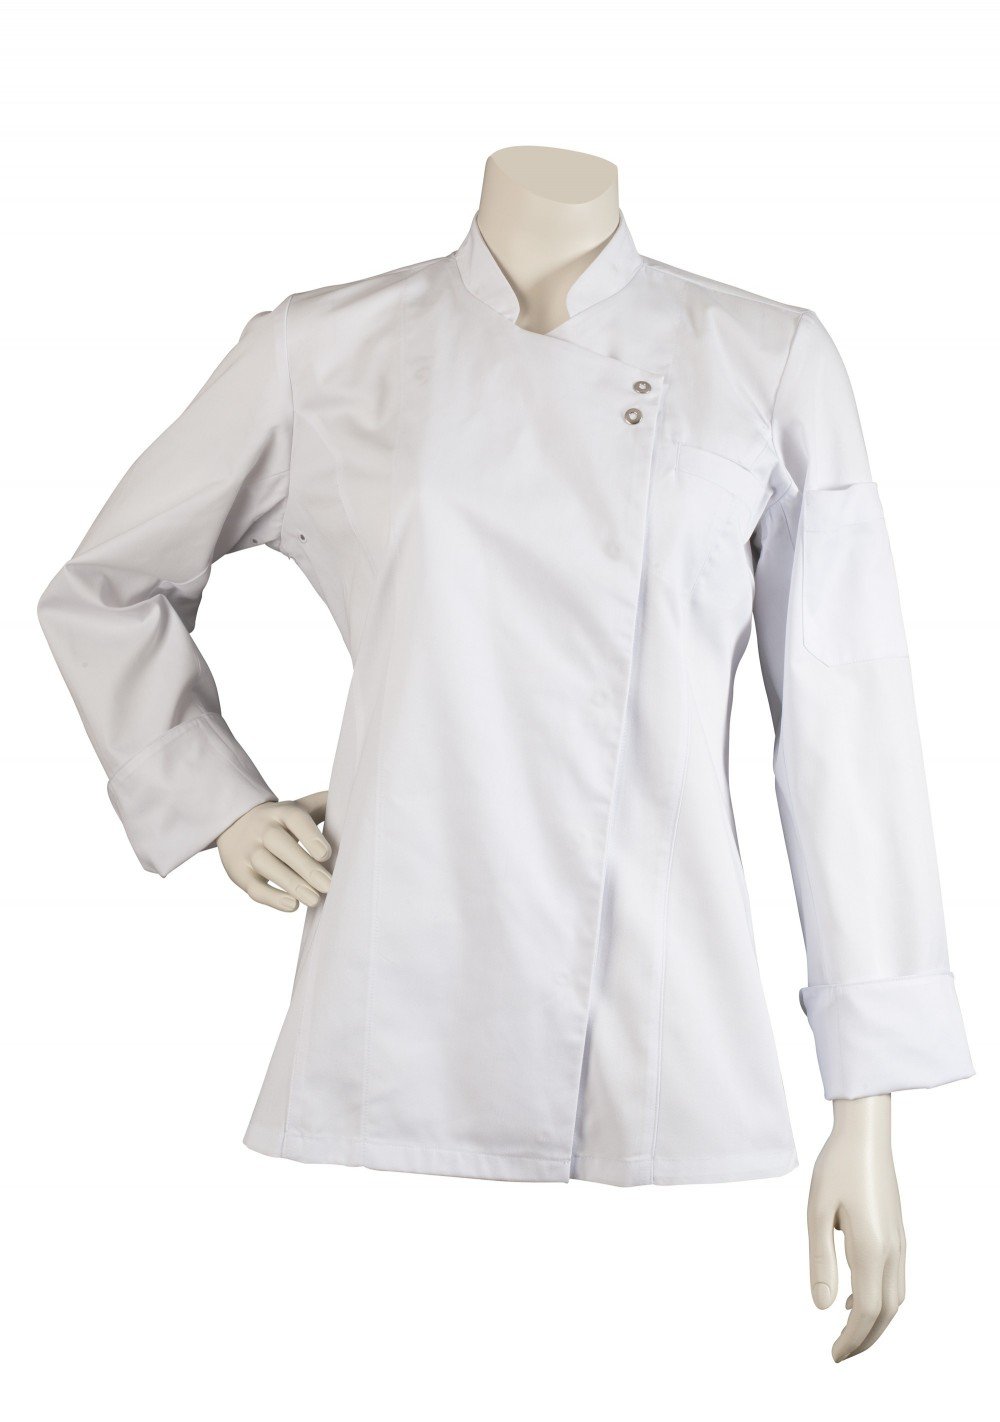 CHEF JACKET FOR WOMAN EGOCHEF COOK JACKE  COCINERO ITALY pastry slim fit made it 